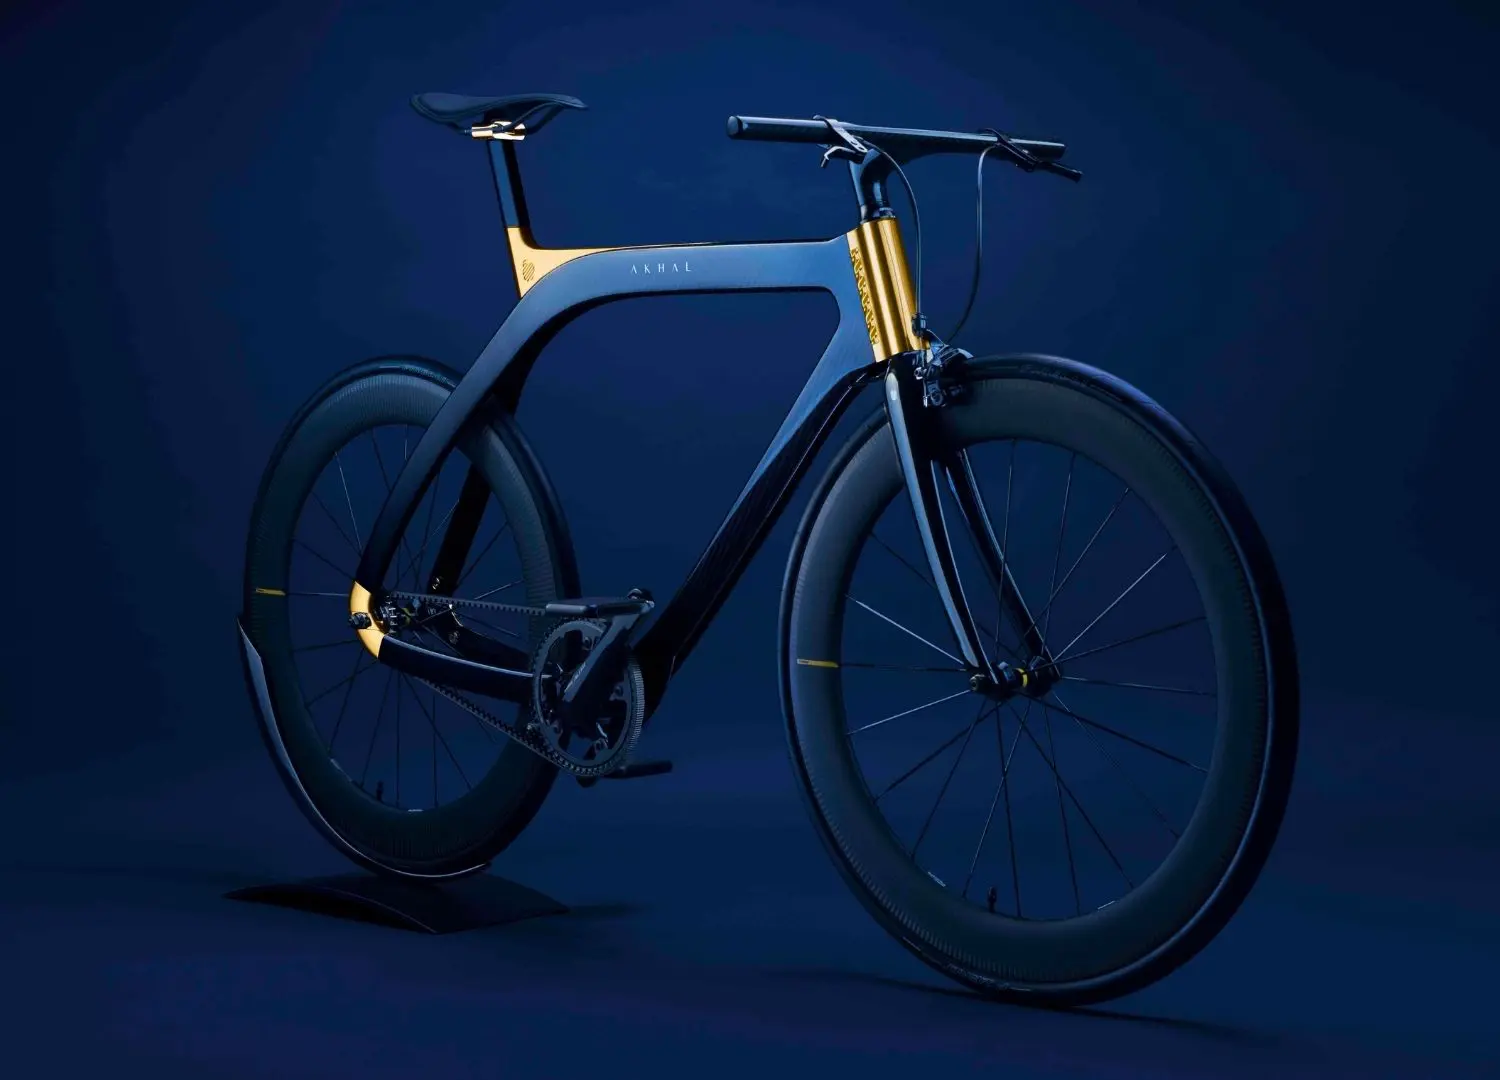 The Akhal Sheen bicycle by Extans